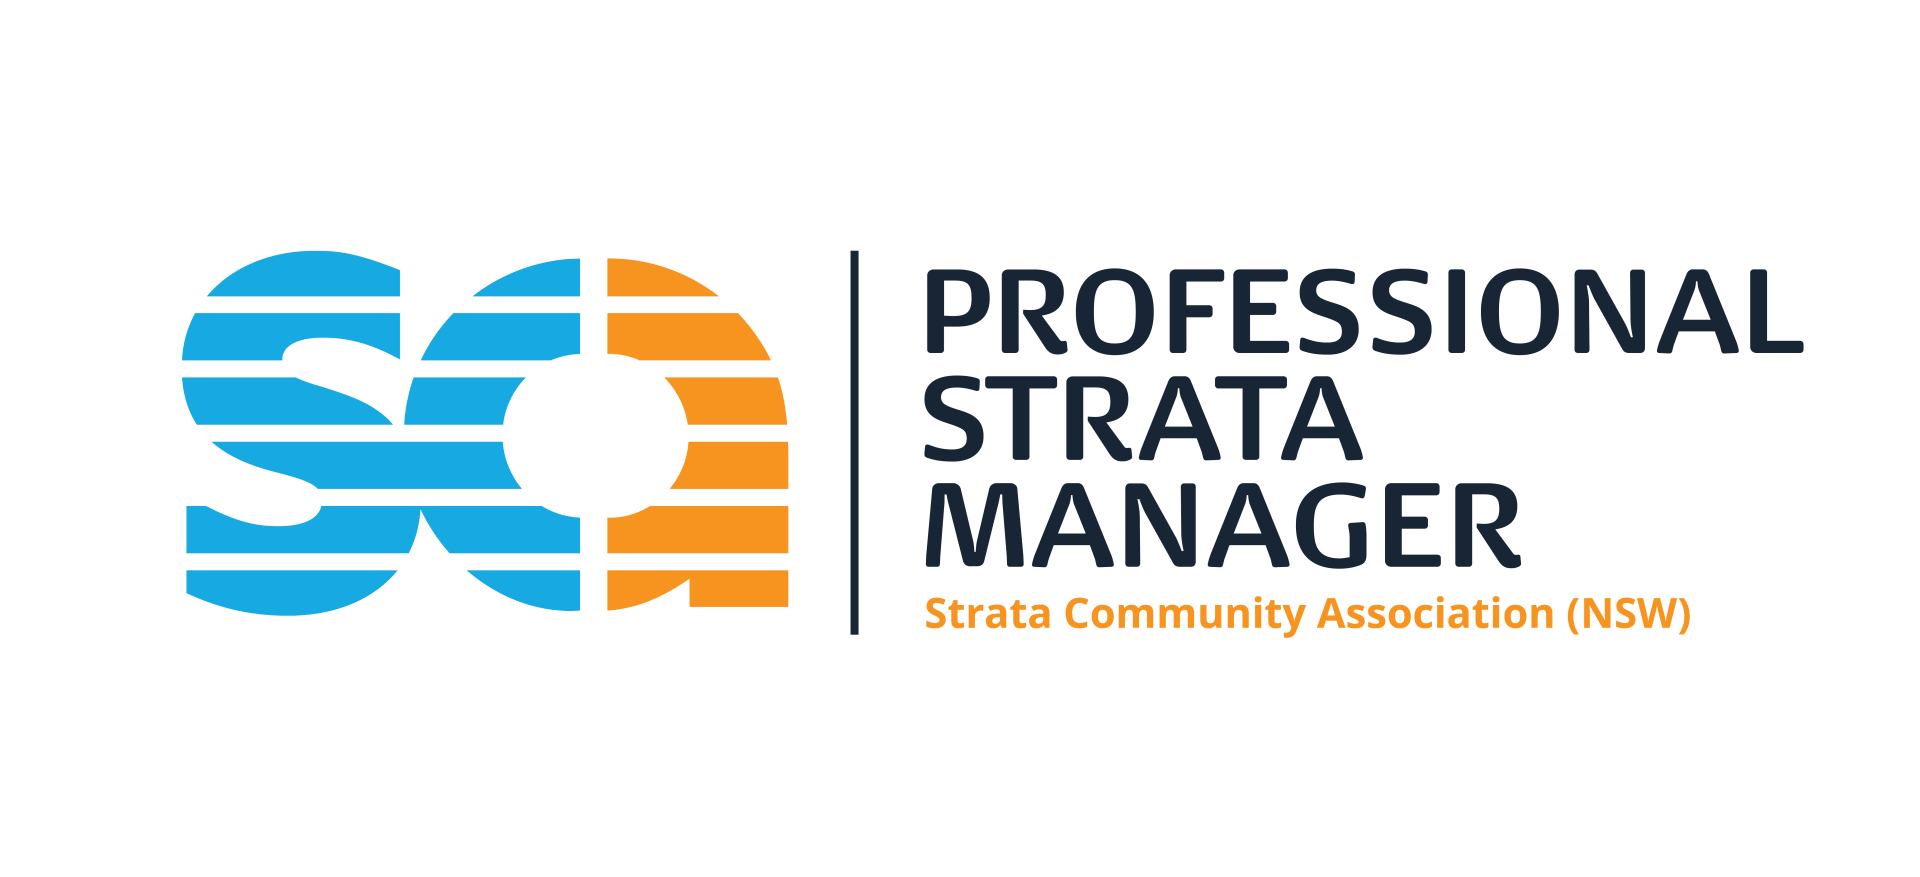 Professional Strata Manager